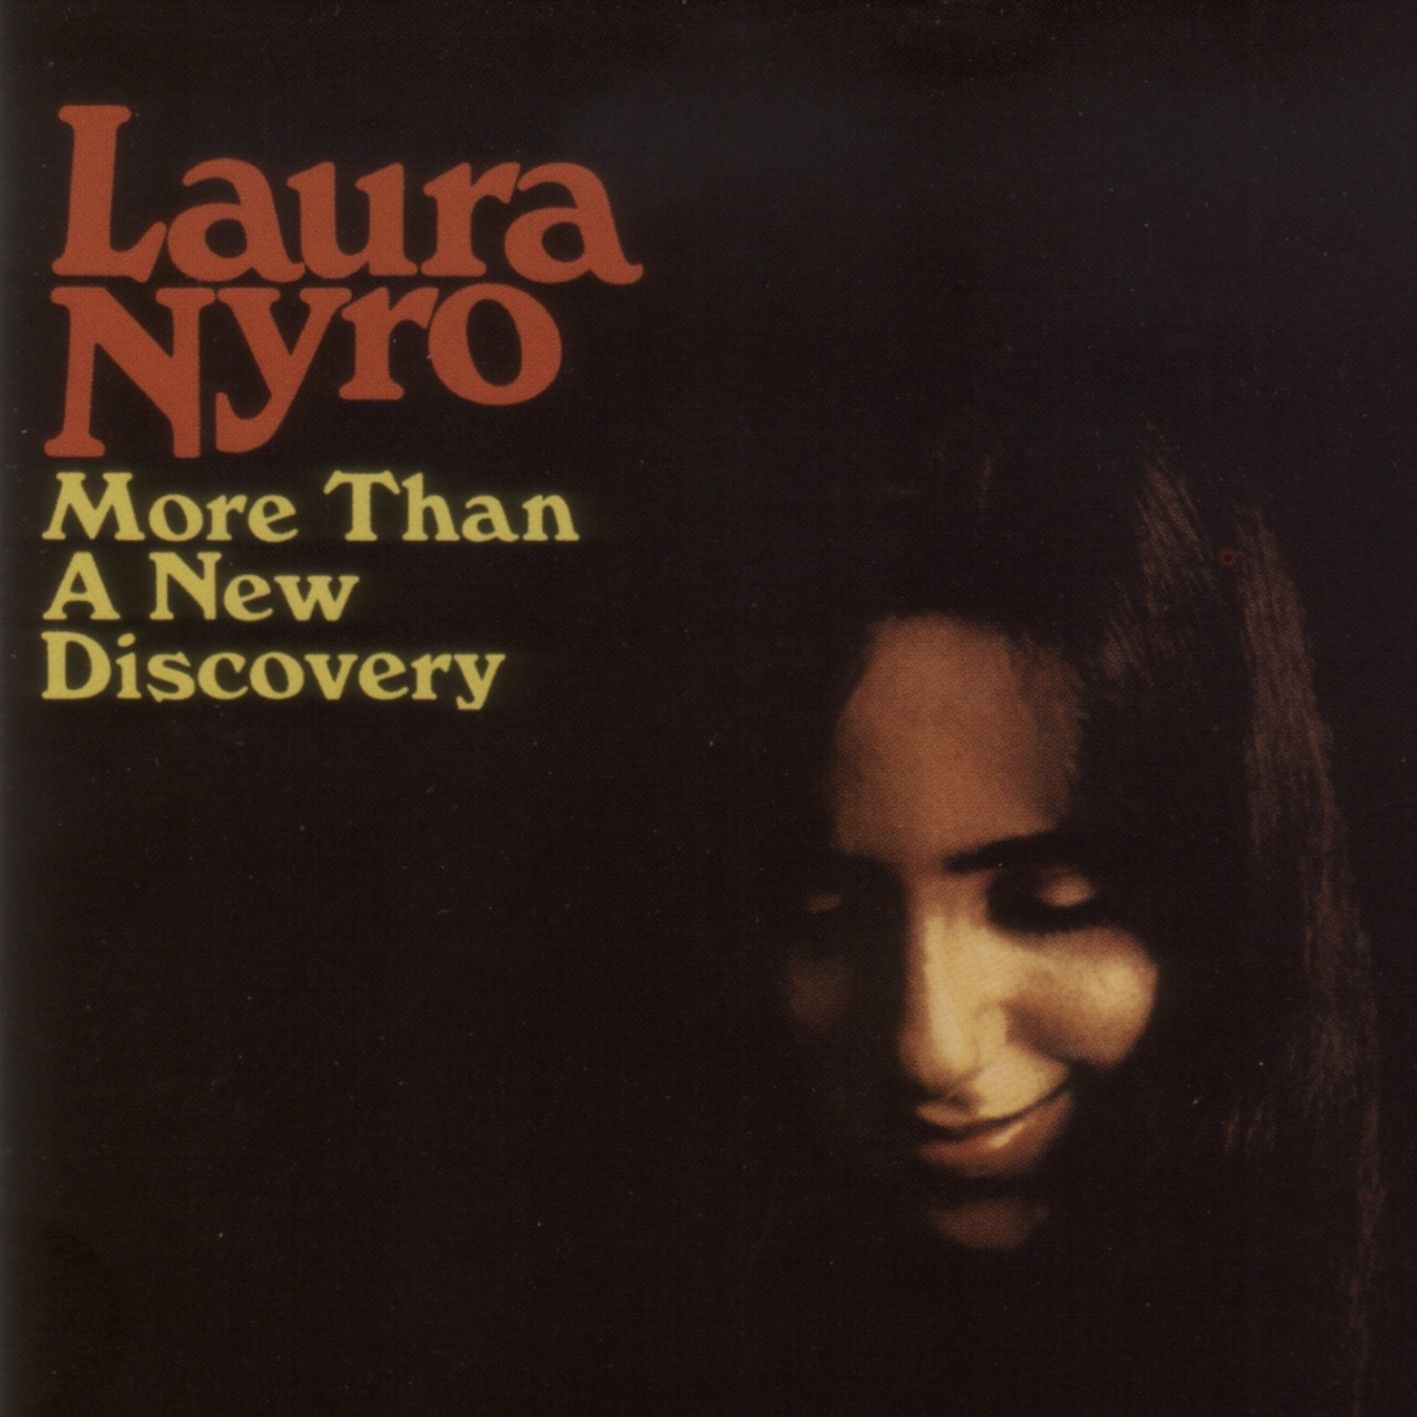 laura-nyro-more-than-a-new-discovery